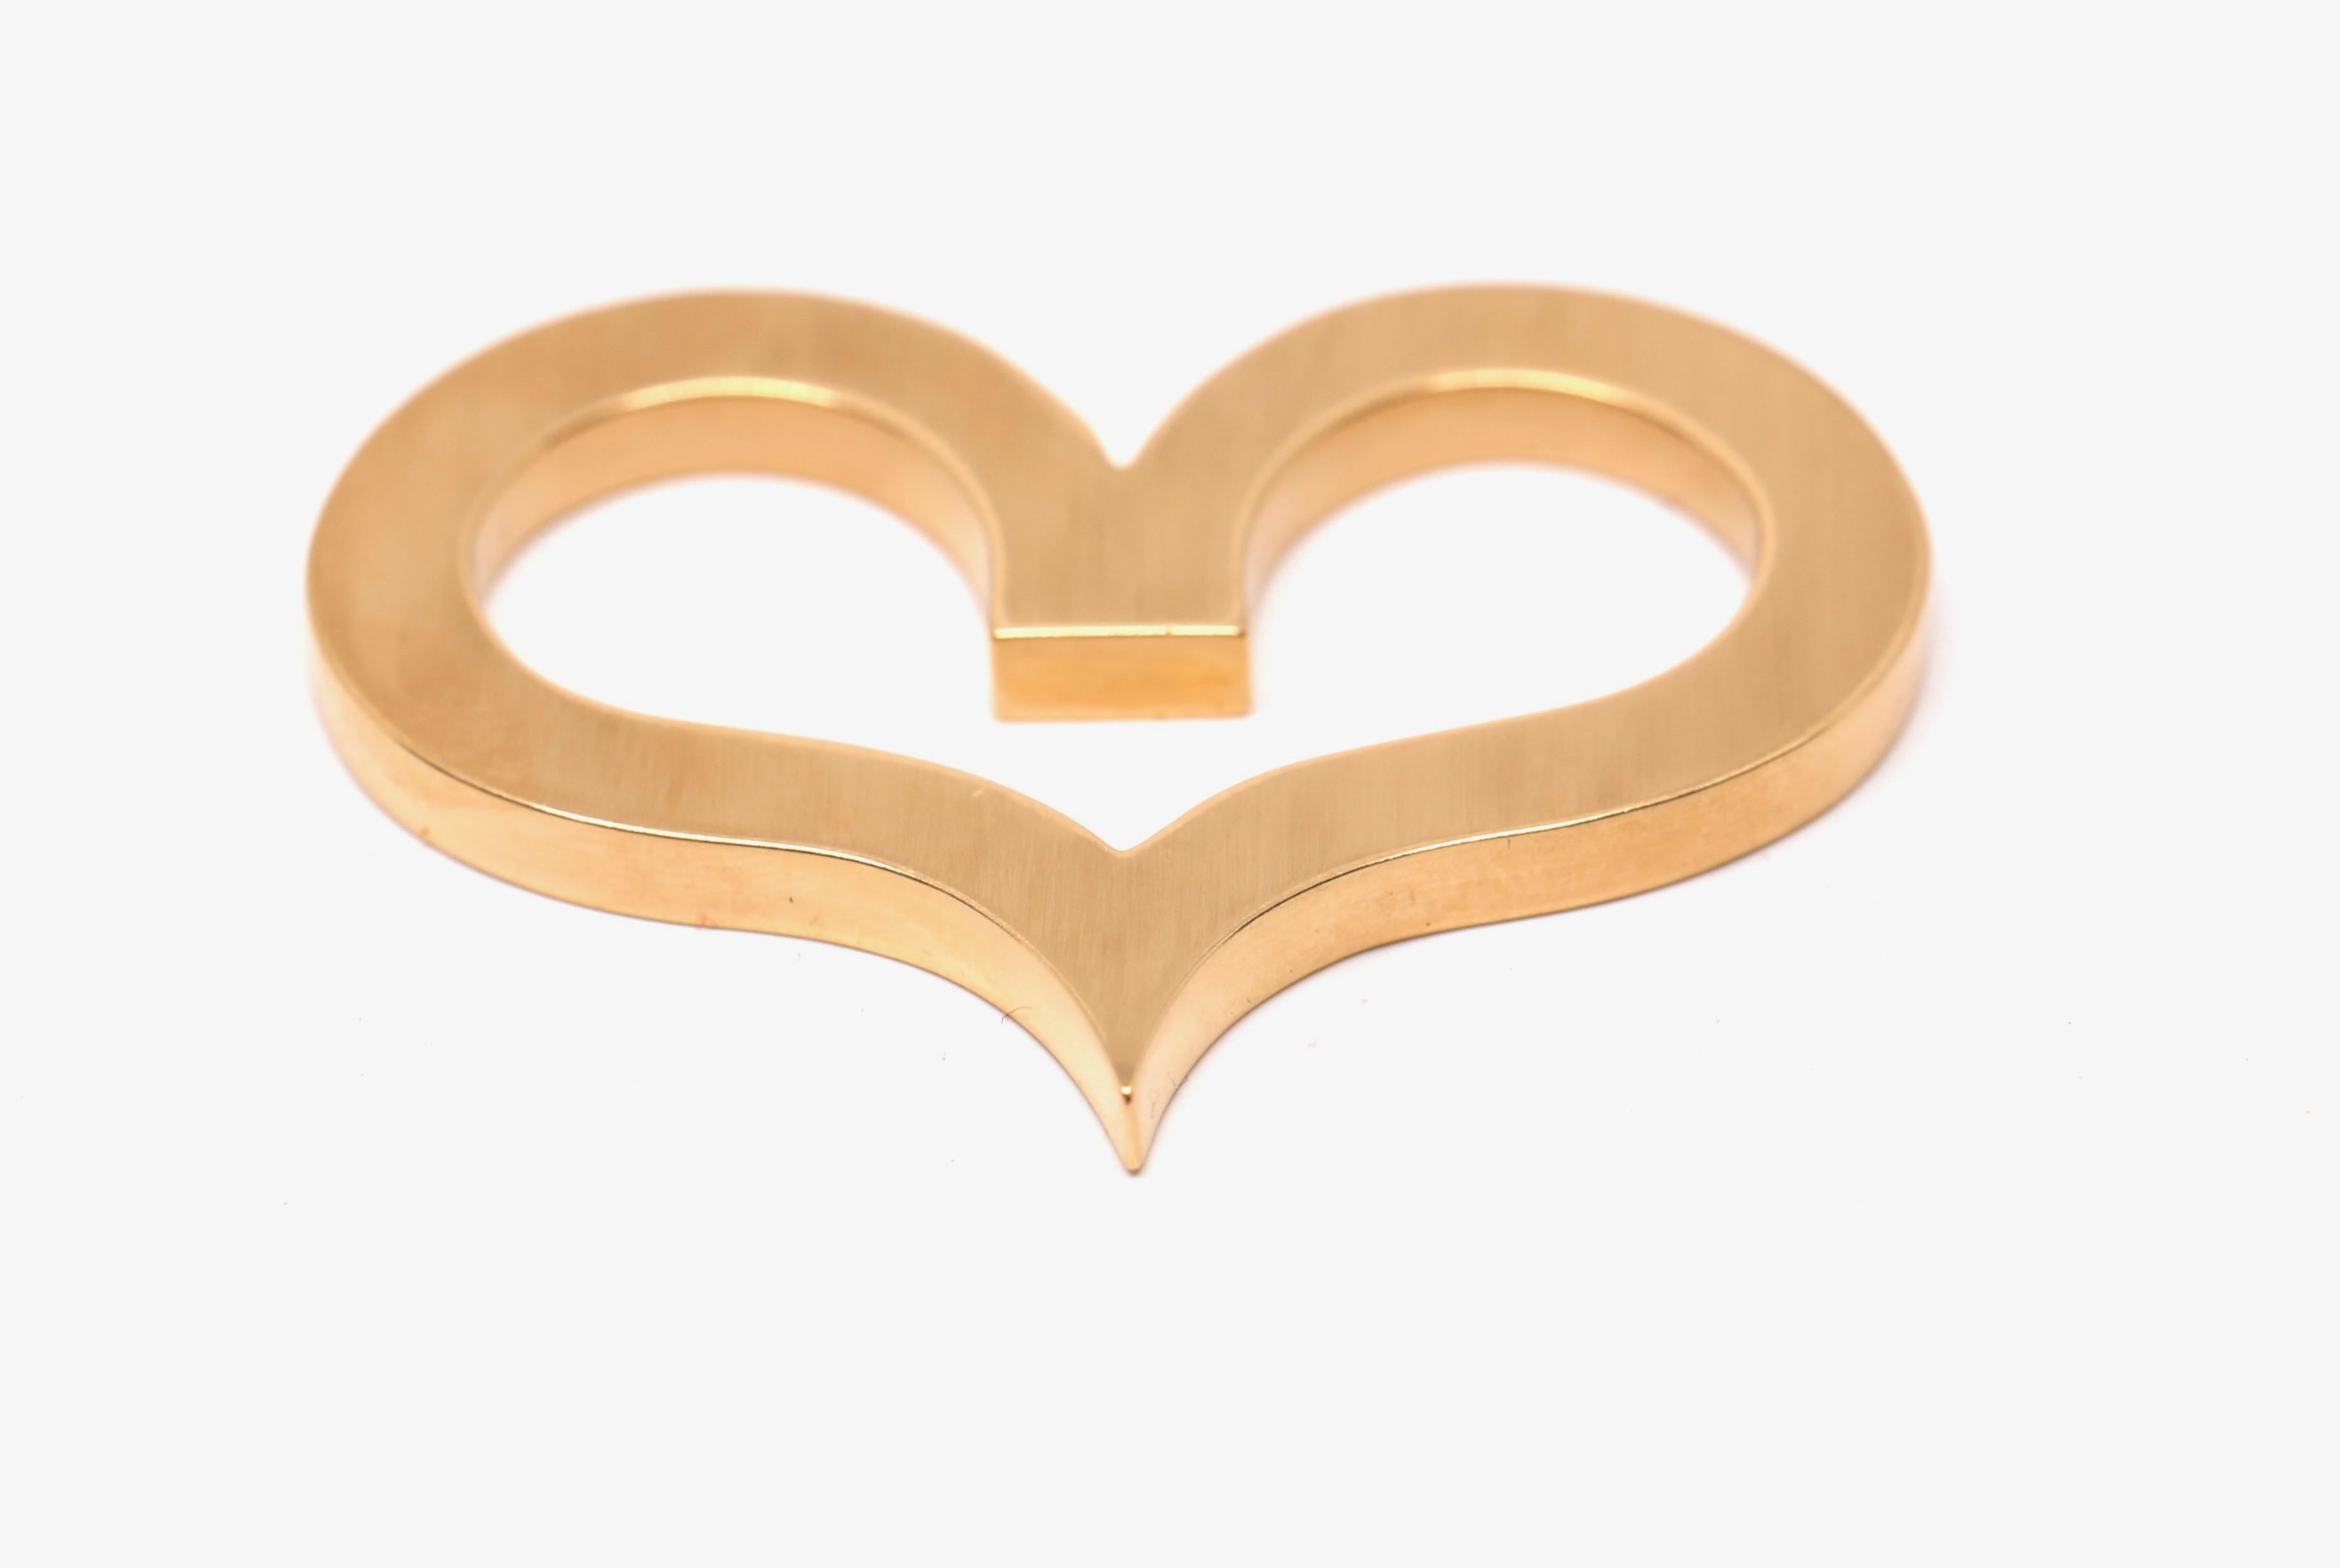 Oversized, 18k yellow gold open heart pendant designed by Jean Dinh Van for Cartier dating to the 1960's. Pendant measures approximately 2